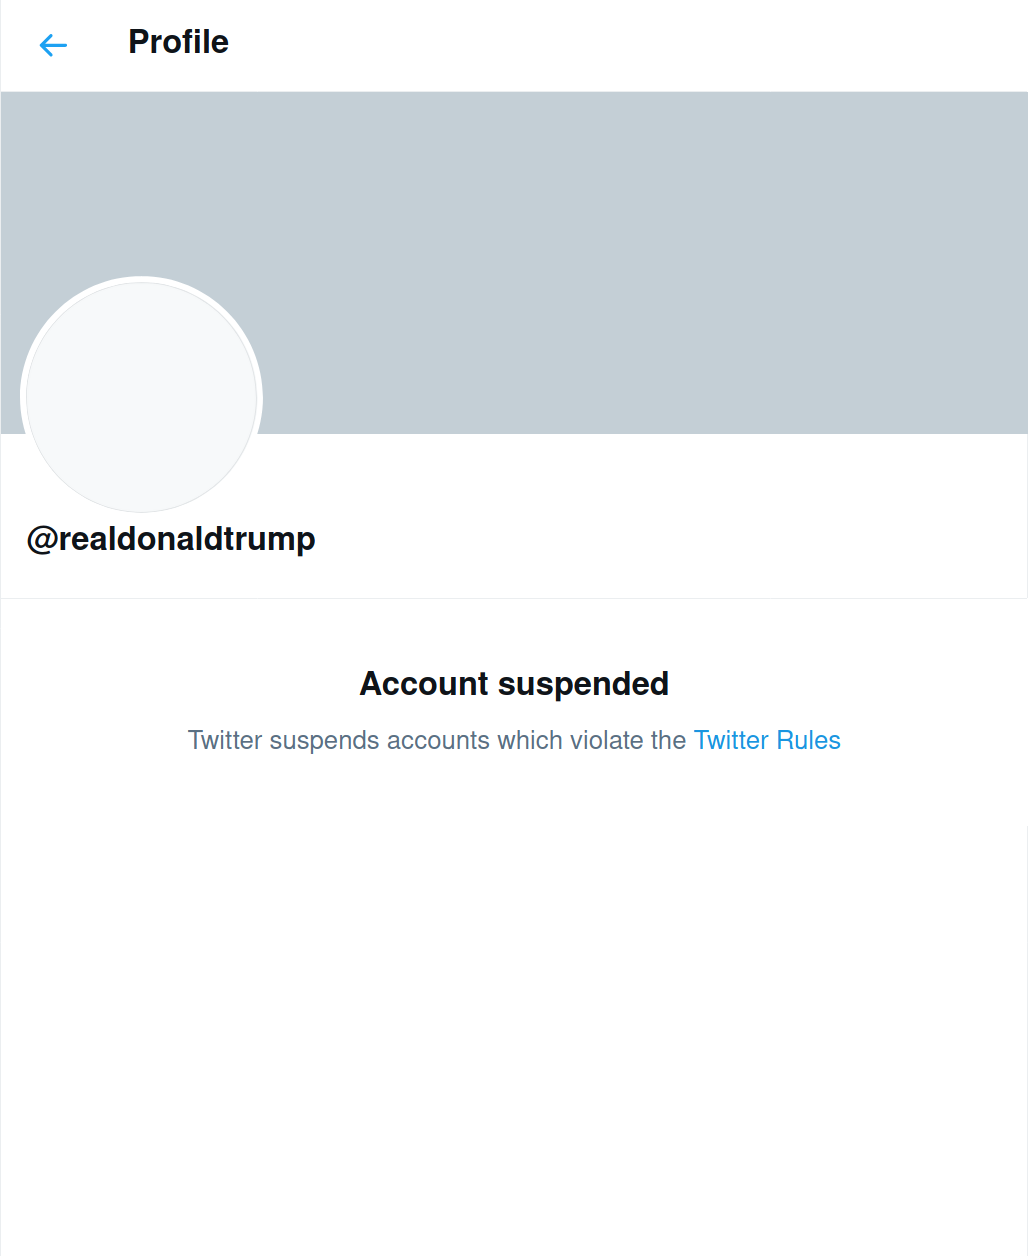 Donald Trump's suspended Twitter account